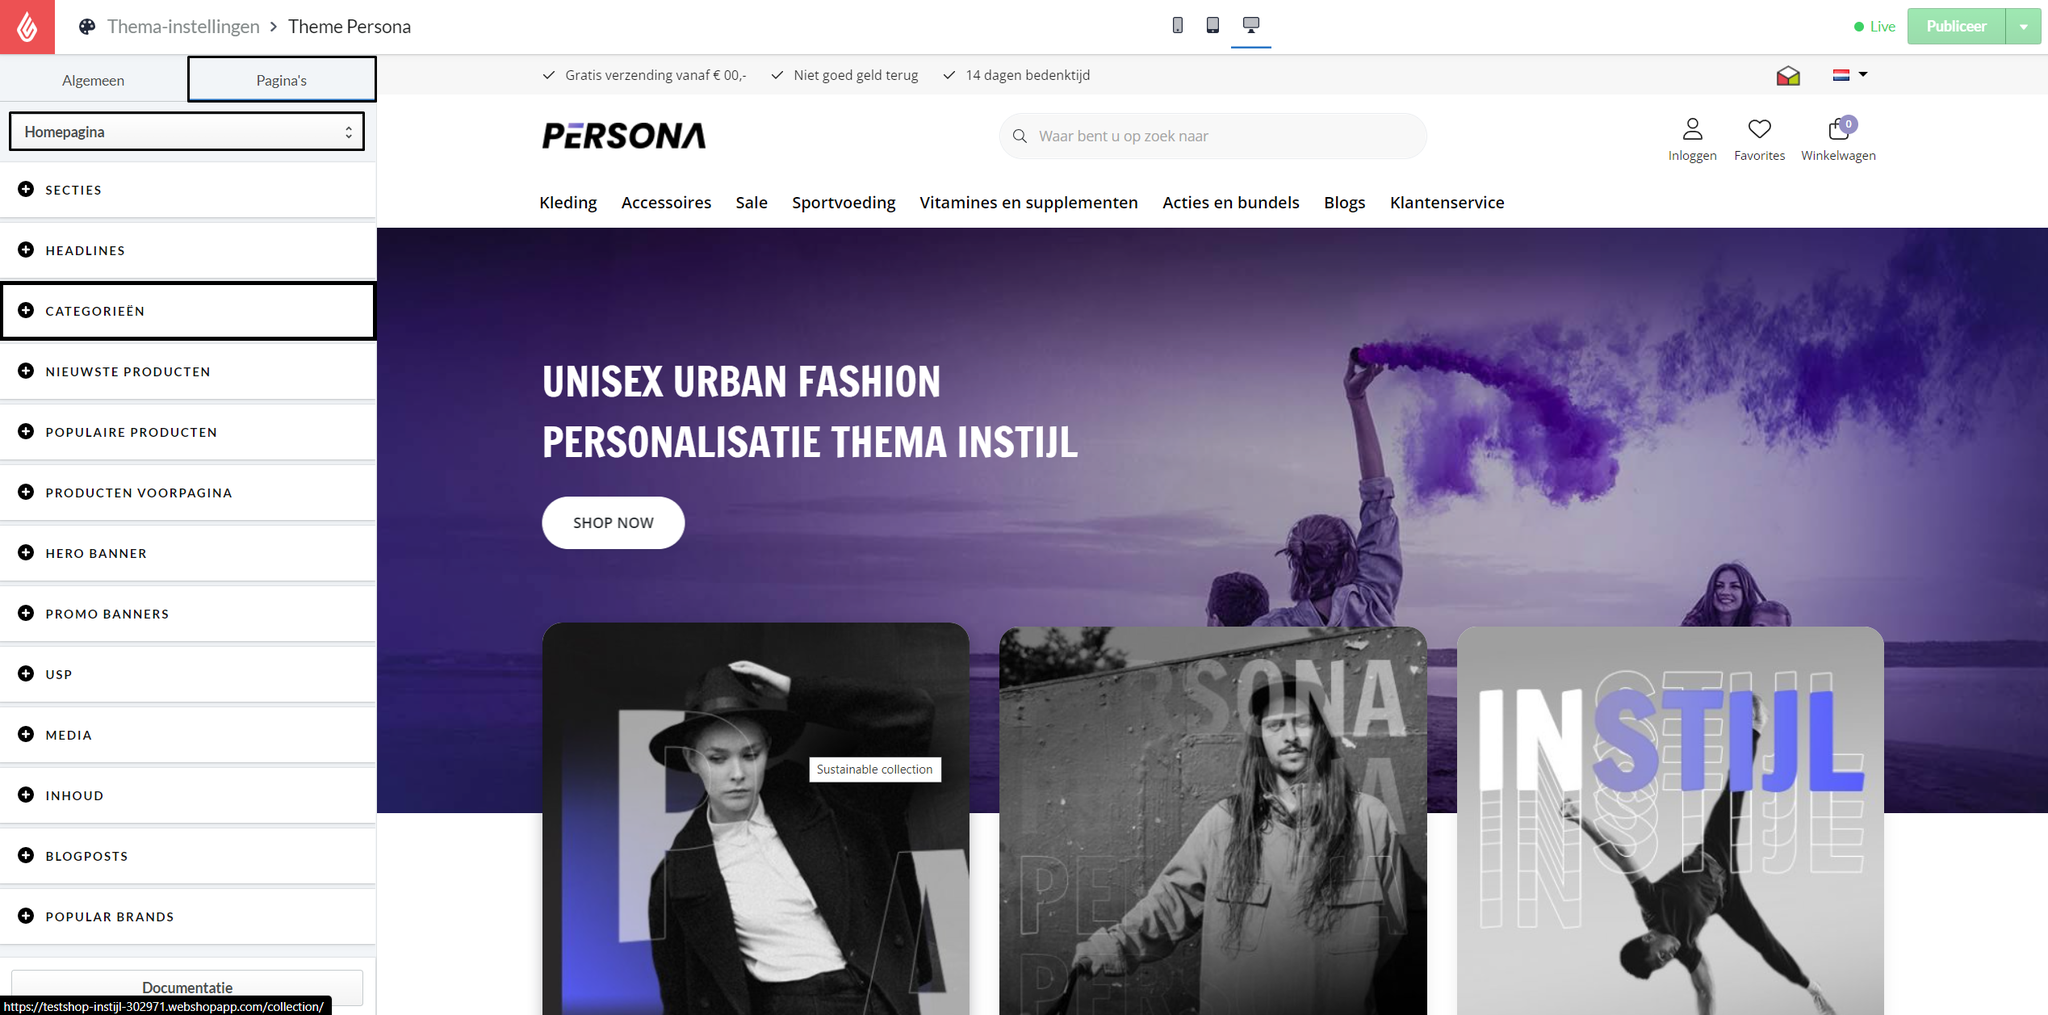 Theme Persona Homepage Category